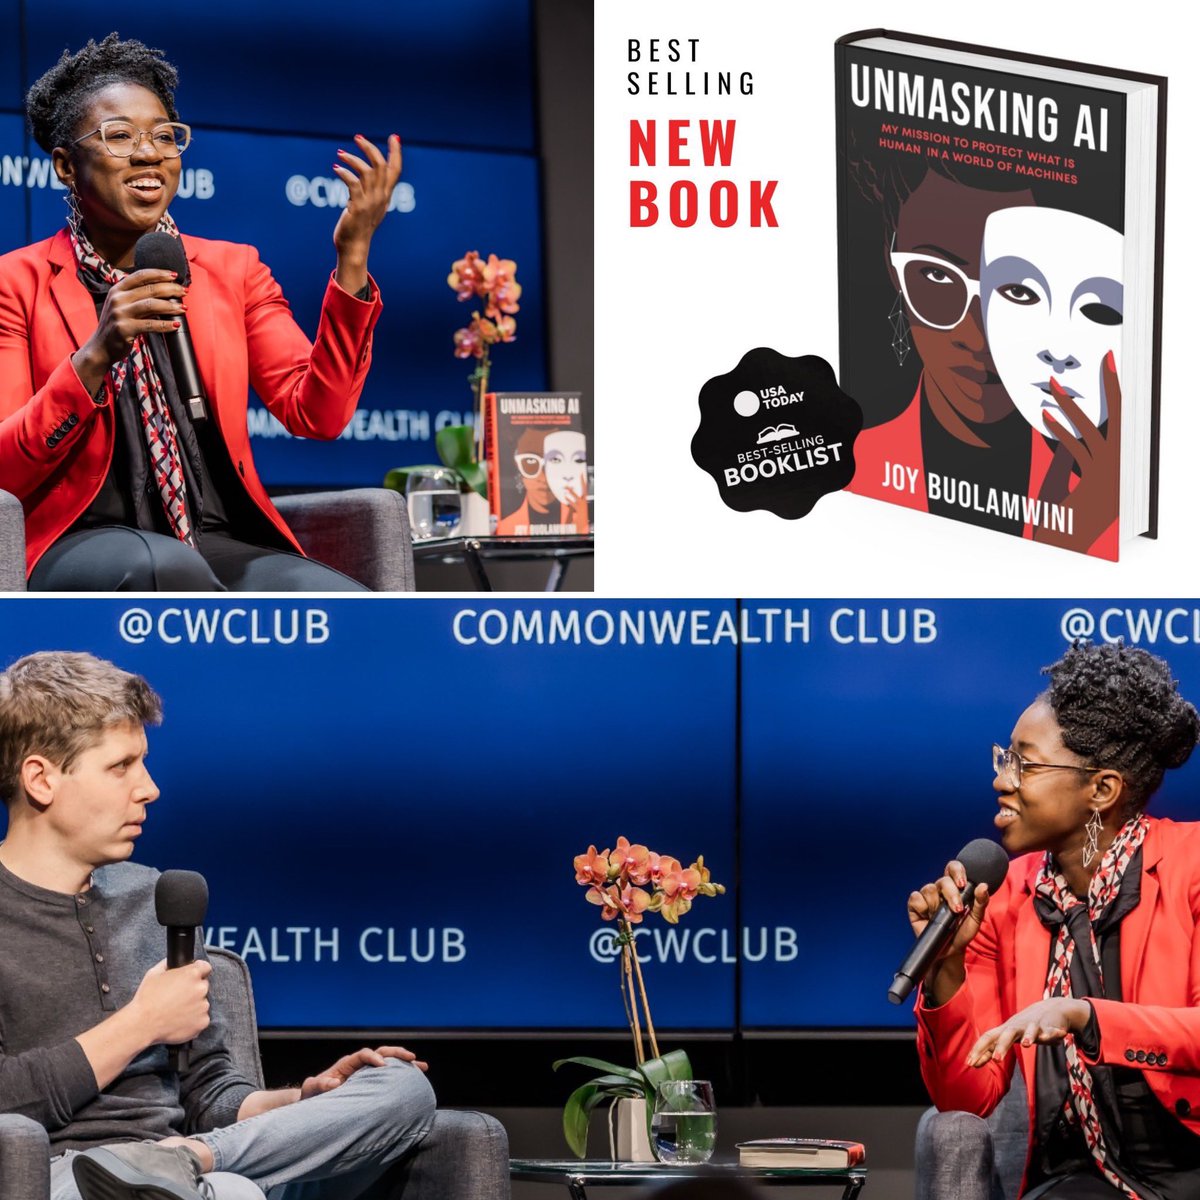 Unmasking AI is now a National Bestseller! Check out the @cwclub book talk conversation on the future of AI with @sama CEO of @OpenAI and me . Help keep the momentum going. Grab your copy of the book, download the audiobook, and caption this photo! #UnmaskingAI 1/n